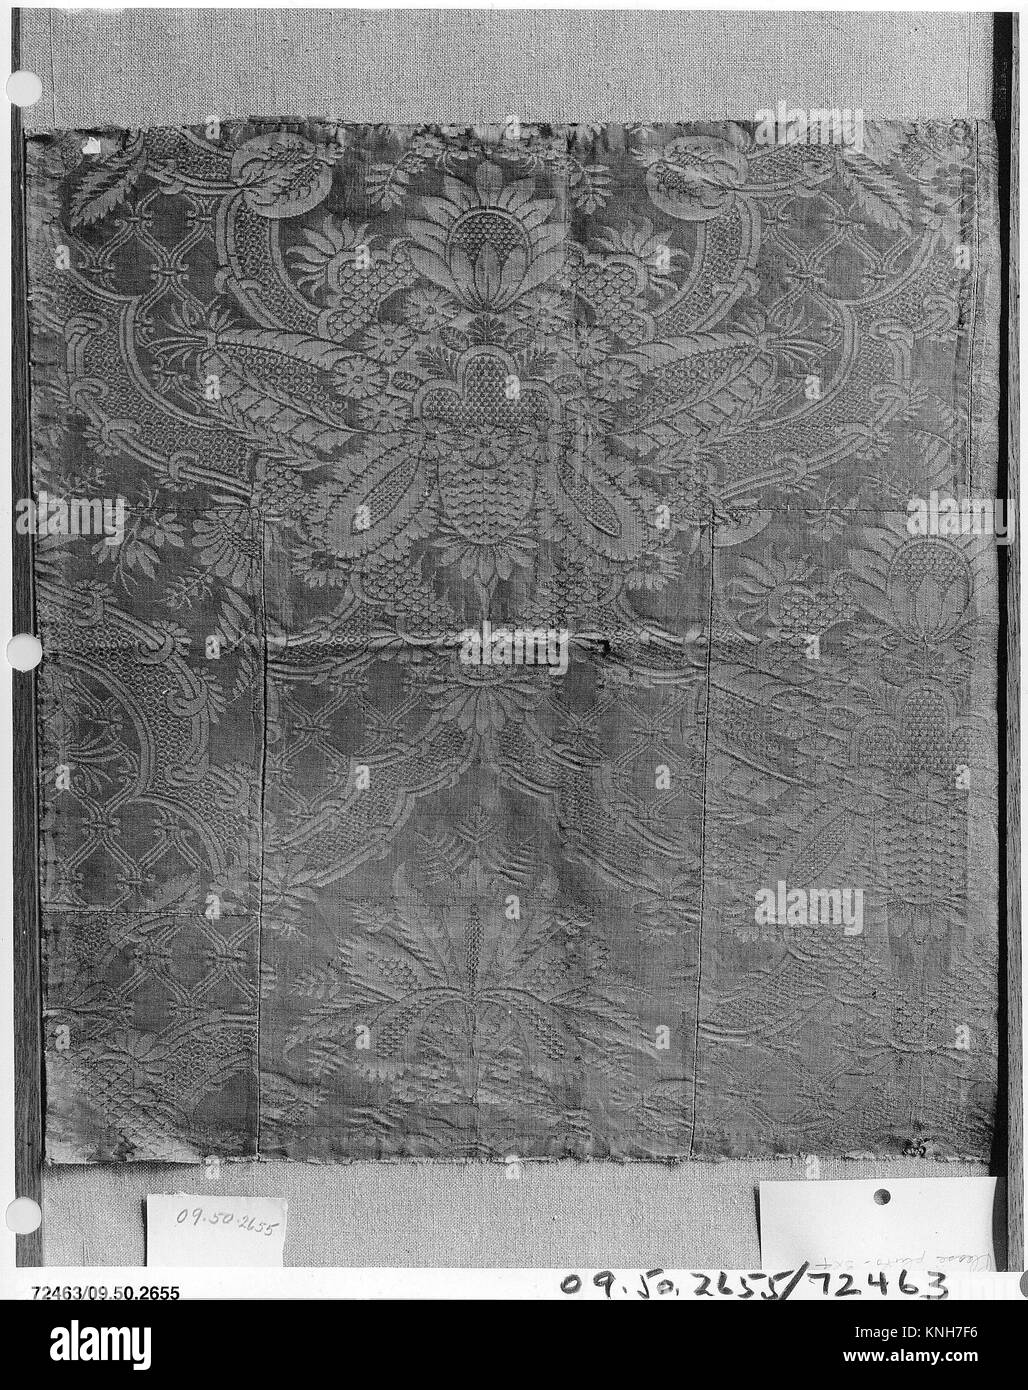 Fragment of silk damask. Date: early 18th century; Culture: French; Medium: Silk; damask weave; Dimensions: 21 x 21 inches (53.3 x 53.3 cm); Stock Photo